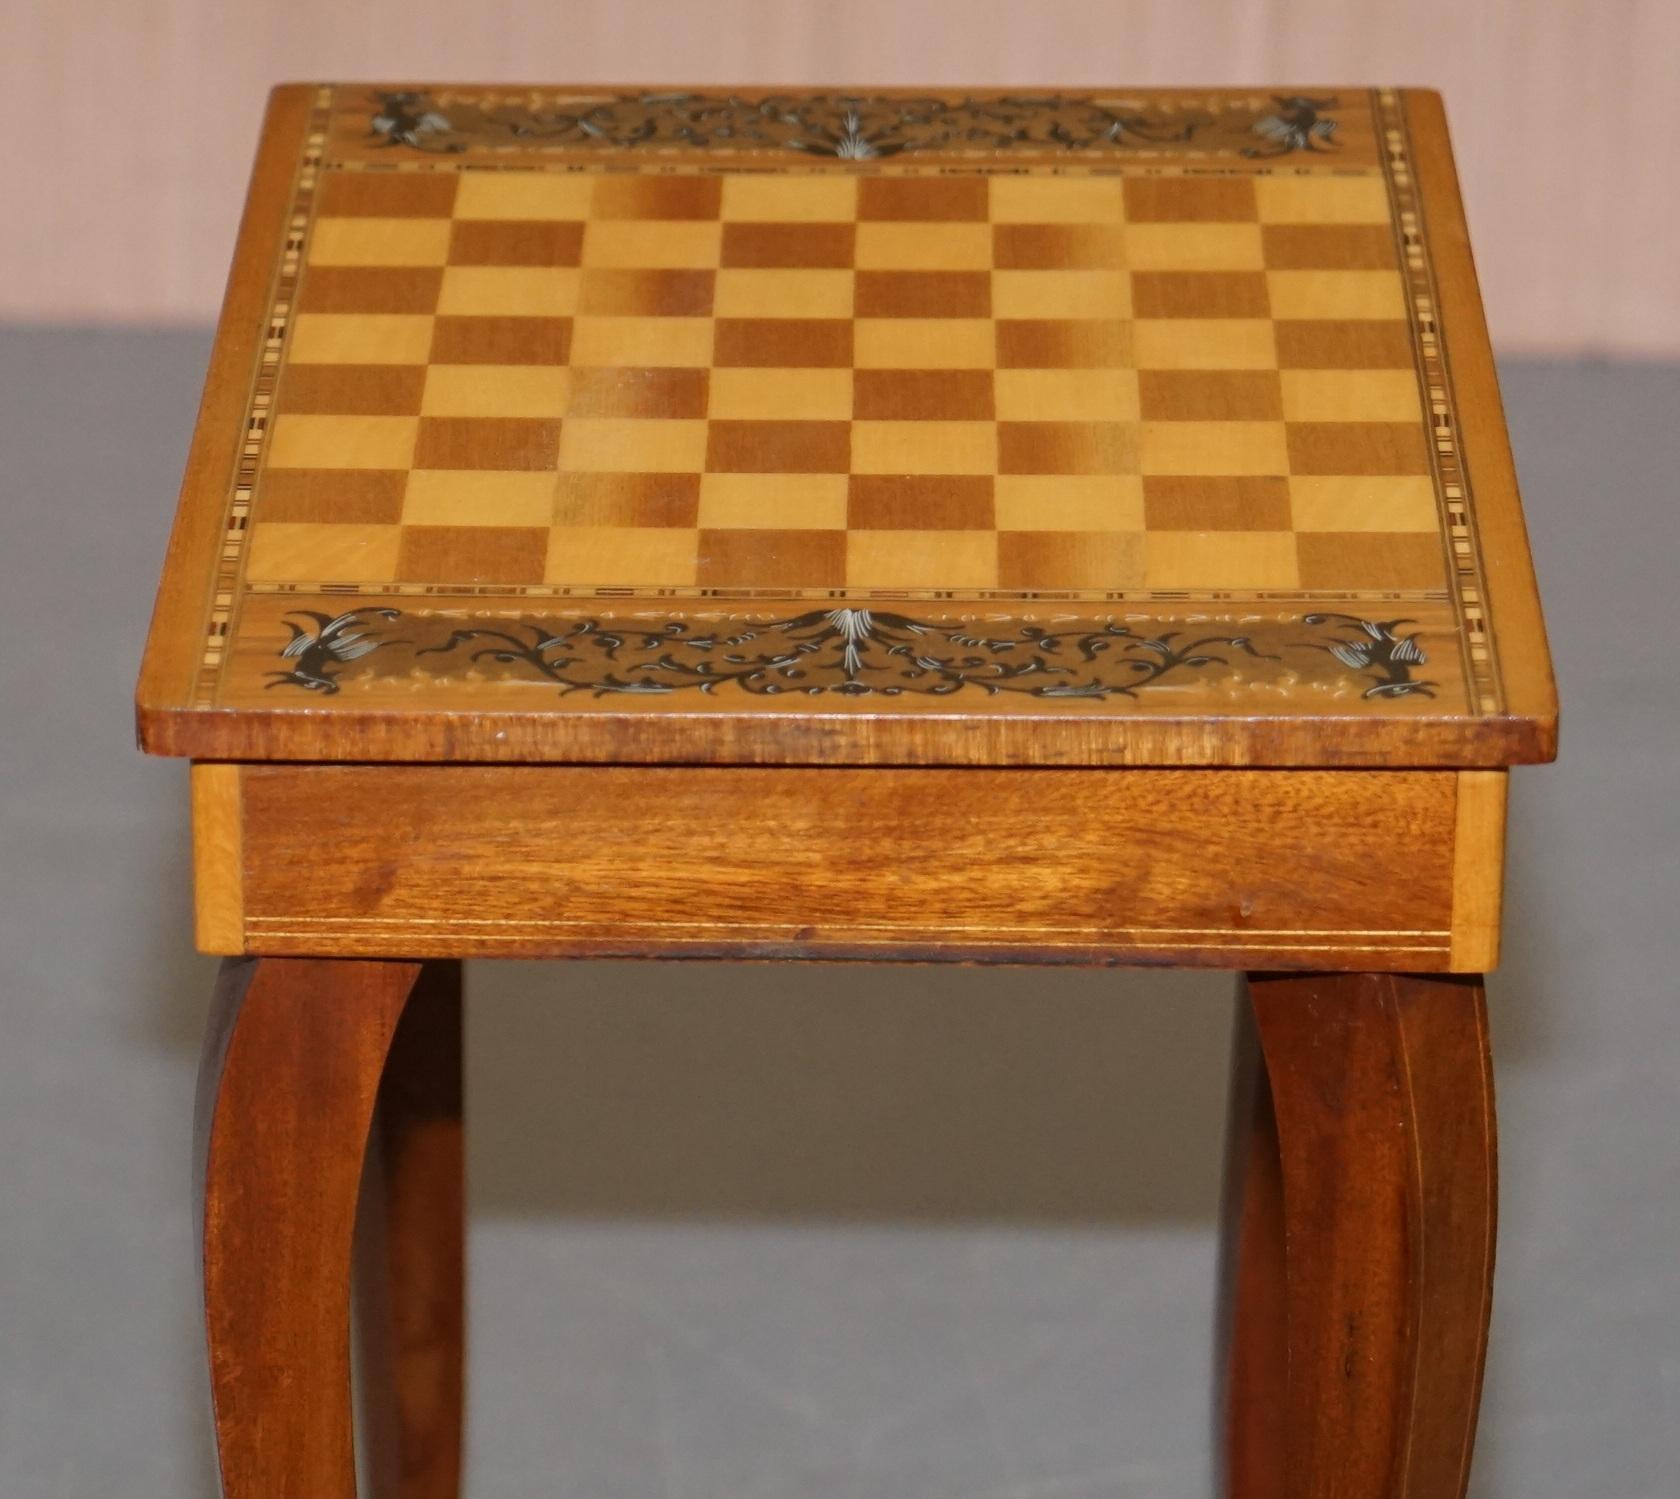 Hand-Crafted Lovely Small Musical Chess Backgammon Games Table with Drawer and Chess Pieces